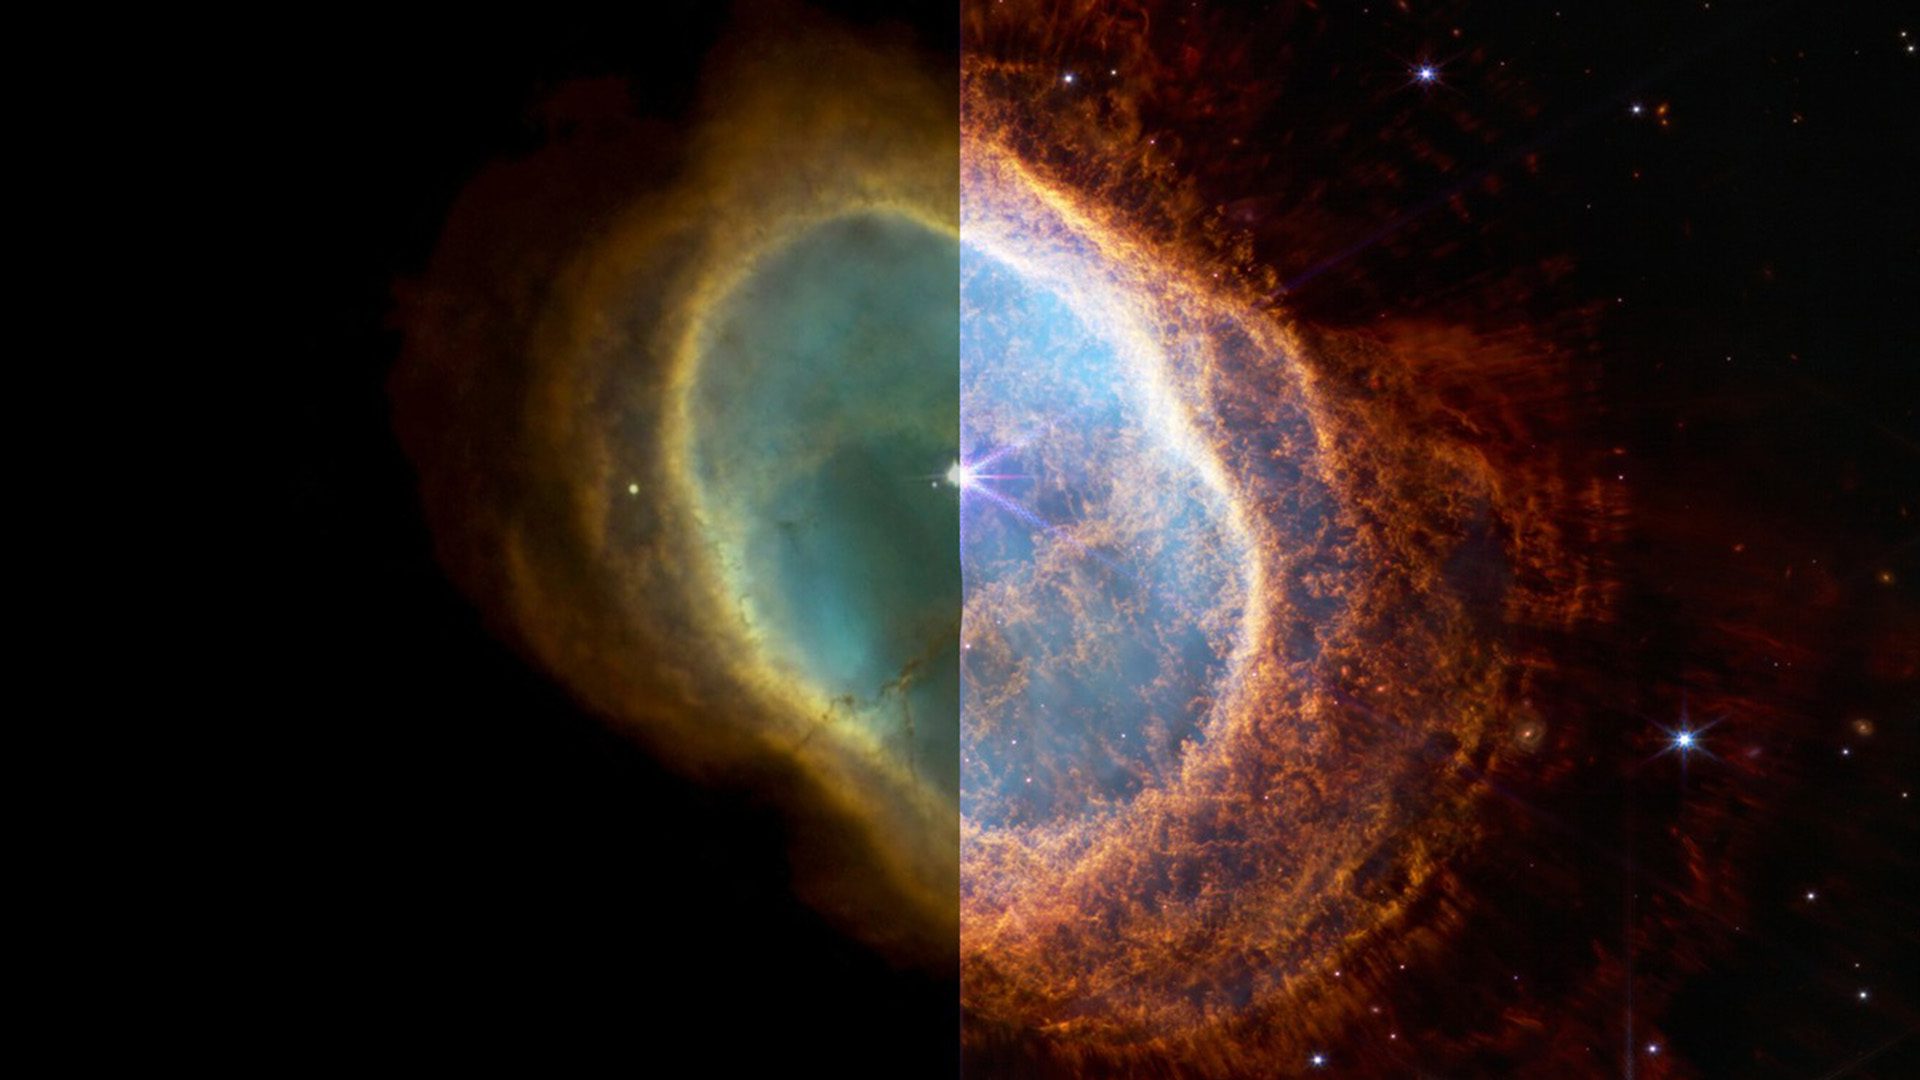 The Southern Ring Nebula as imaged by Hubble (left) and James Webb (right); Photo Credit: NASA